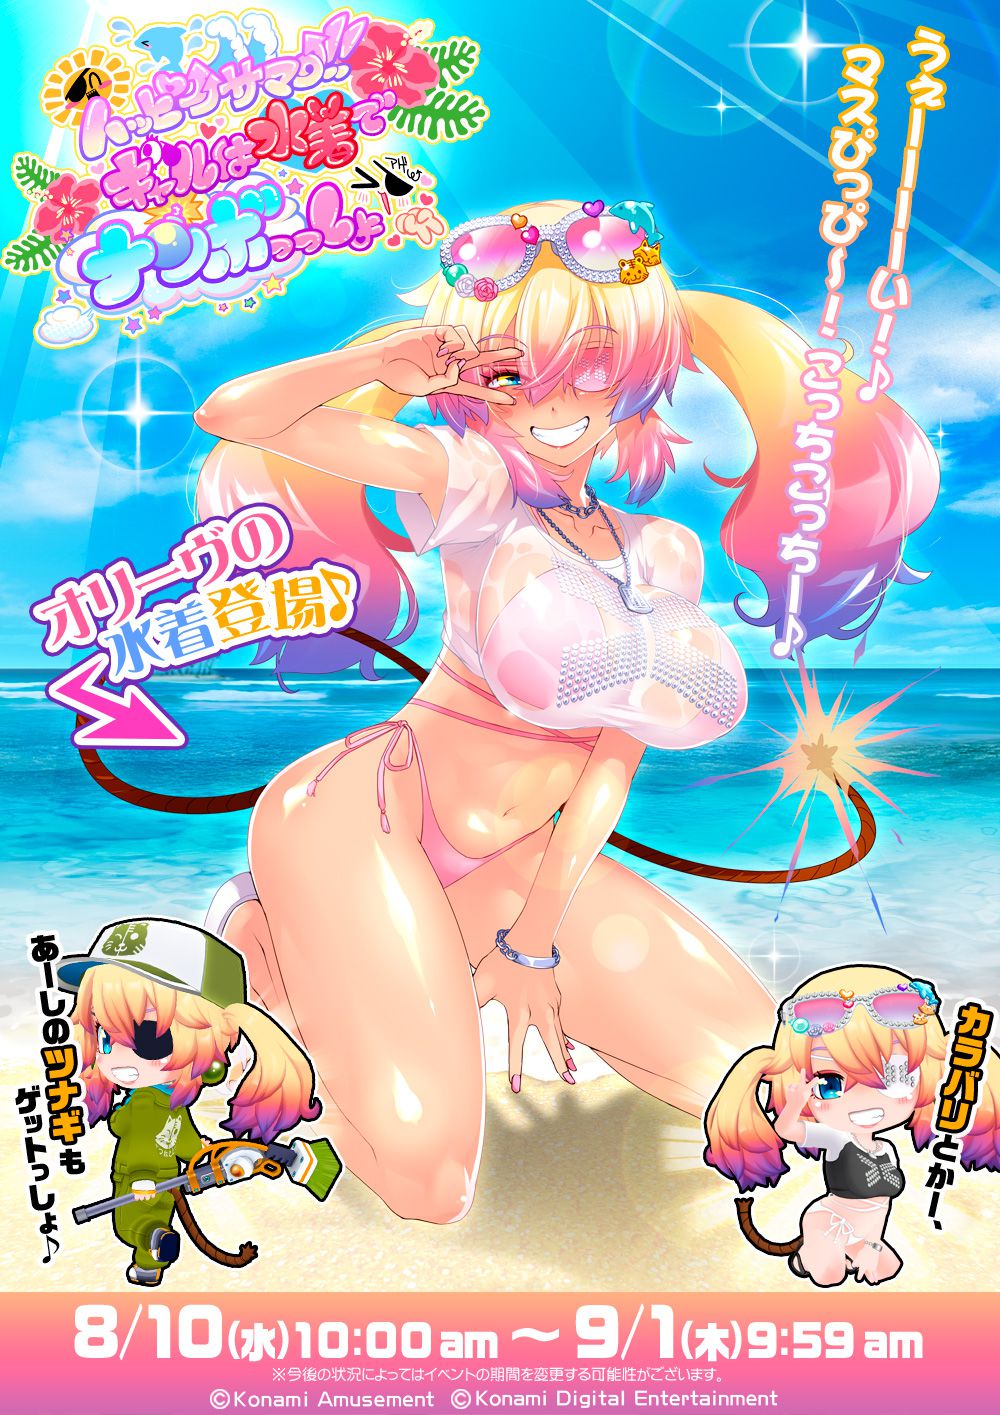 "Bomber Girl" Dosquebe's swimsuit costume with too much whiplash erotic! 3